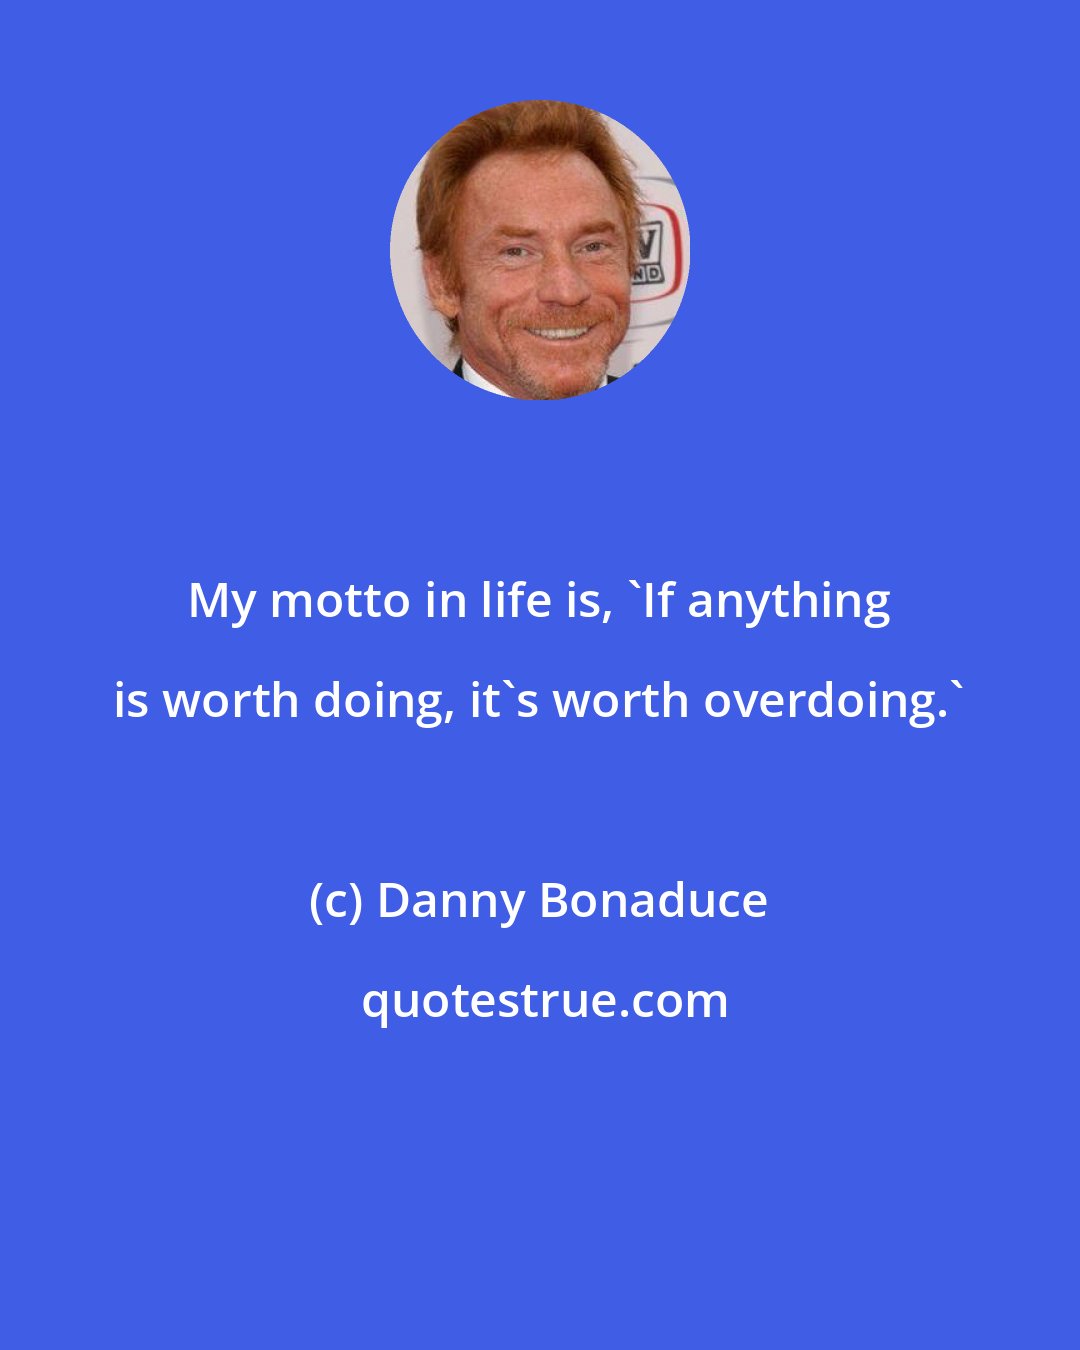 Danny Bonaduce: My motto in life is, 'If anything is worth doing, it's worth overdoing.'